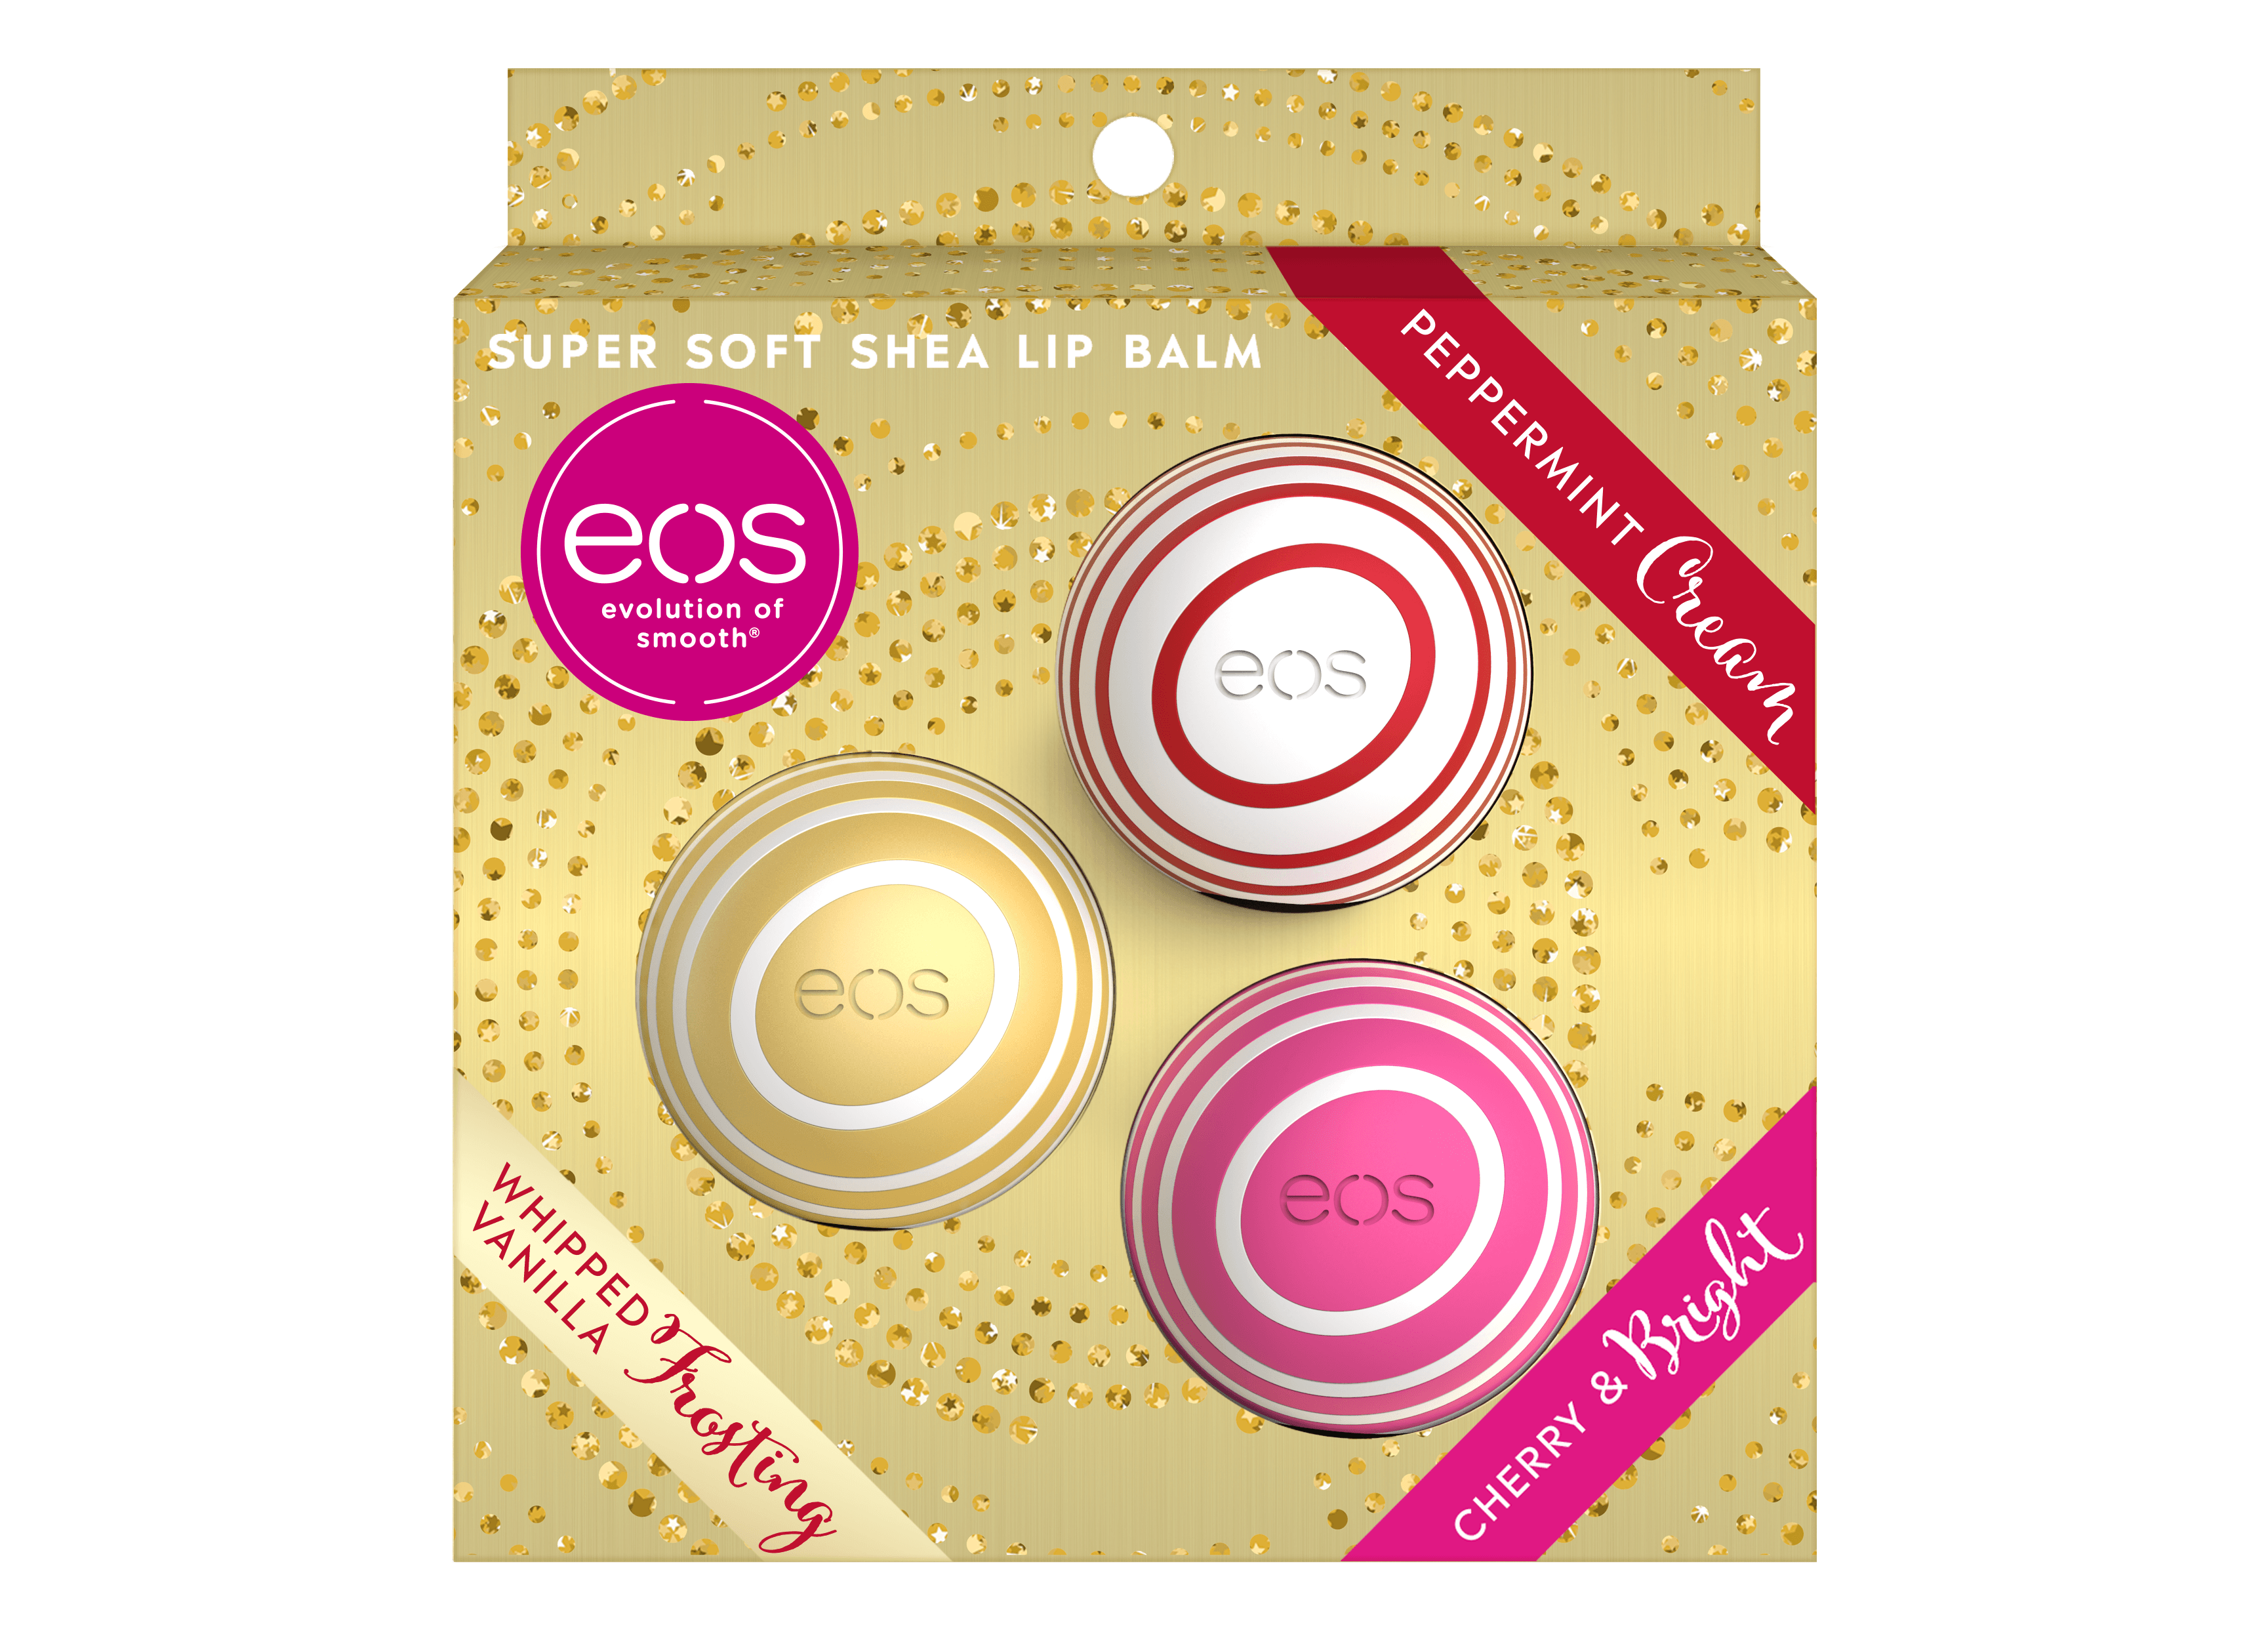 eos Holiday Lip Balm Sphere | Peppermint Cream, Whipped Vanilla Frosting and Cherry and Bright | Limited Edition | 0.25 oz | 3-Pack - image 2 of 5